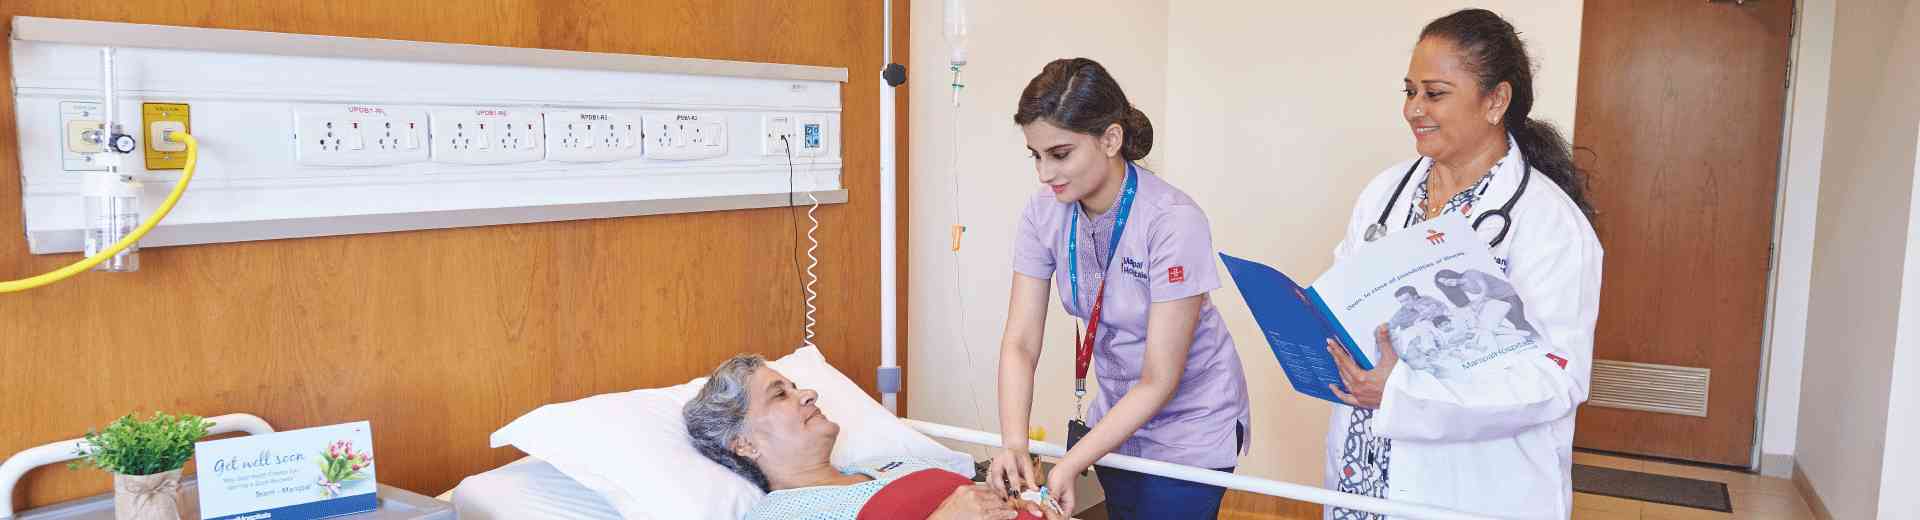 Outpatient Inpatient and Emergency services in Varthur Road